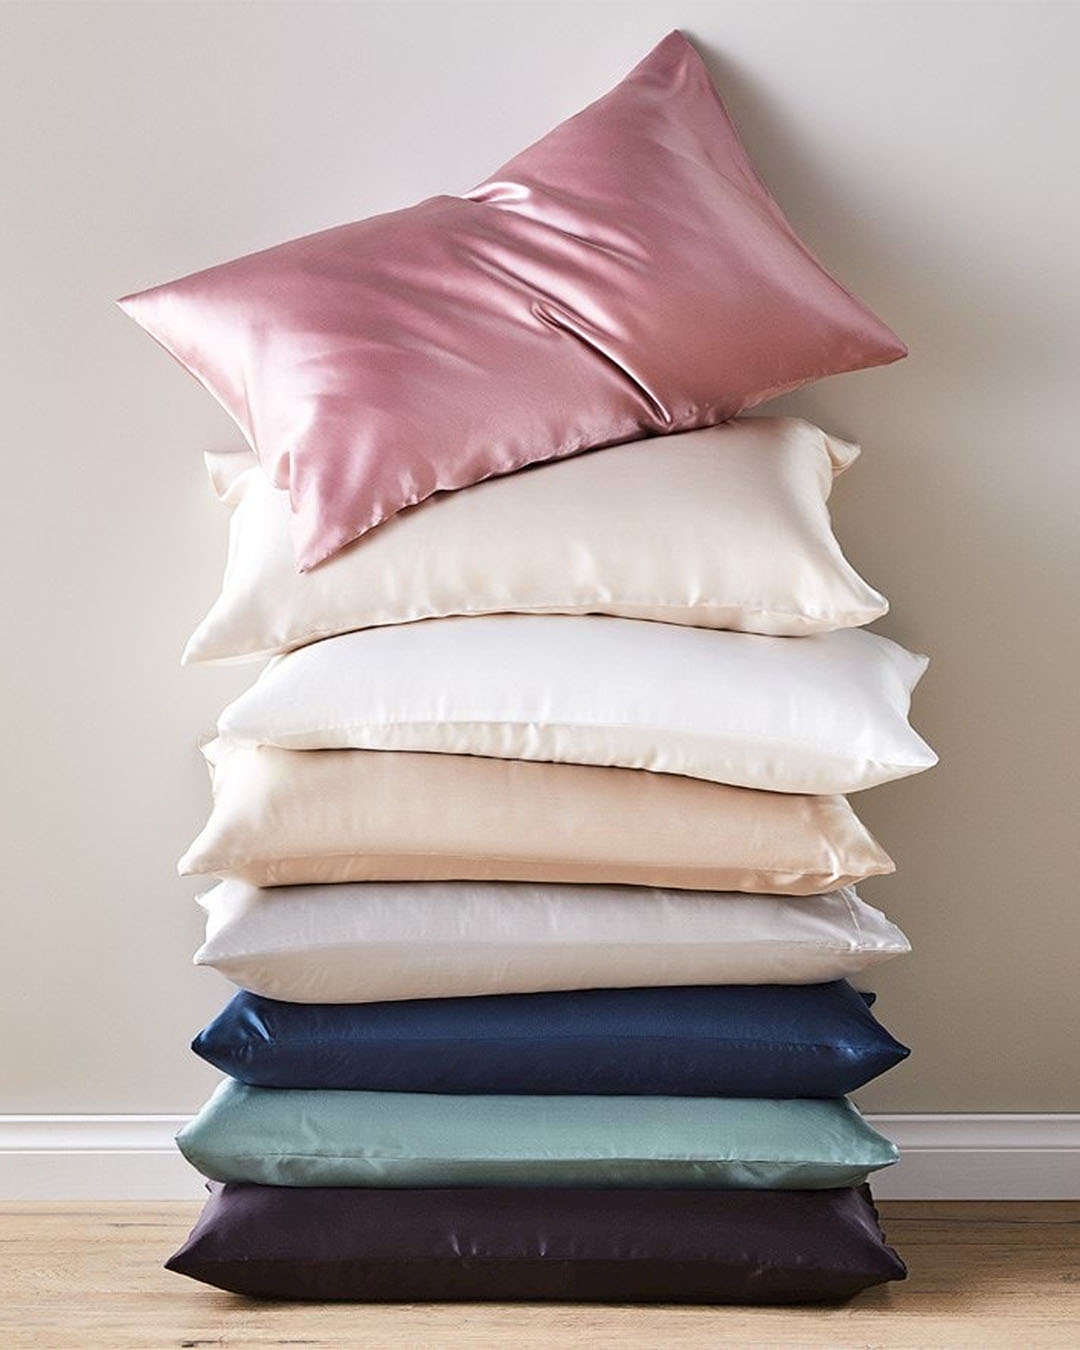 A stack of gorgeous silk pillowcases from Adairs.